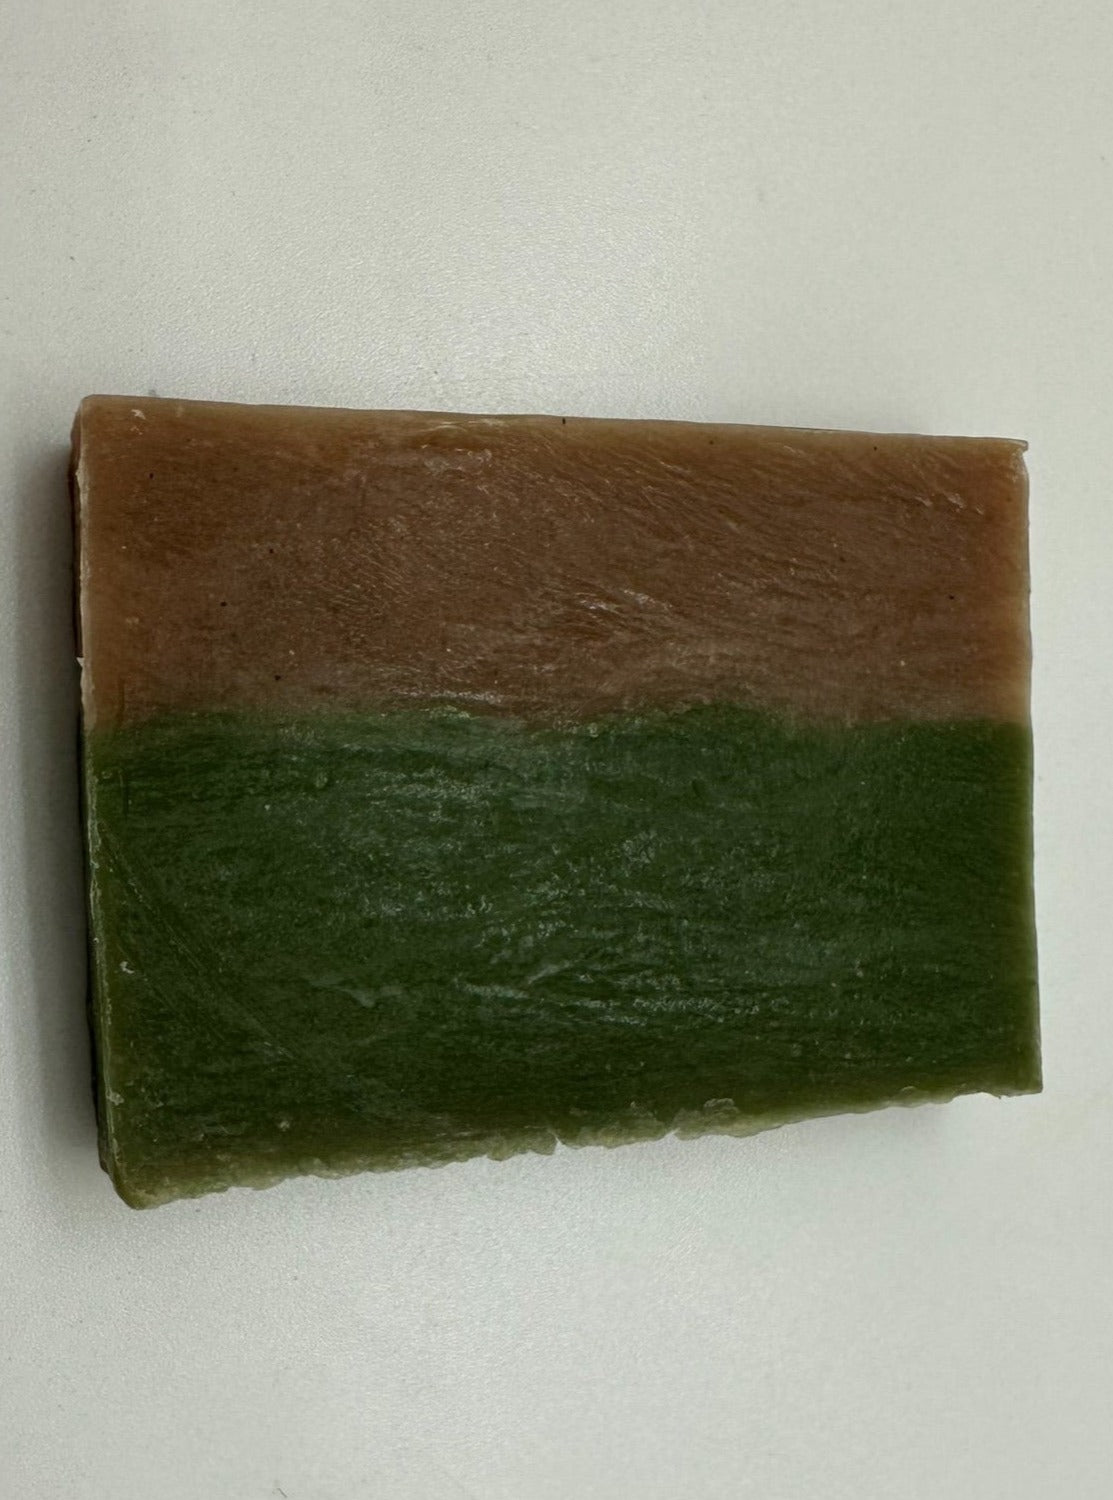 Soap bar that is colored dark green on the bottom and dark brown on the top.